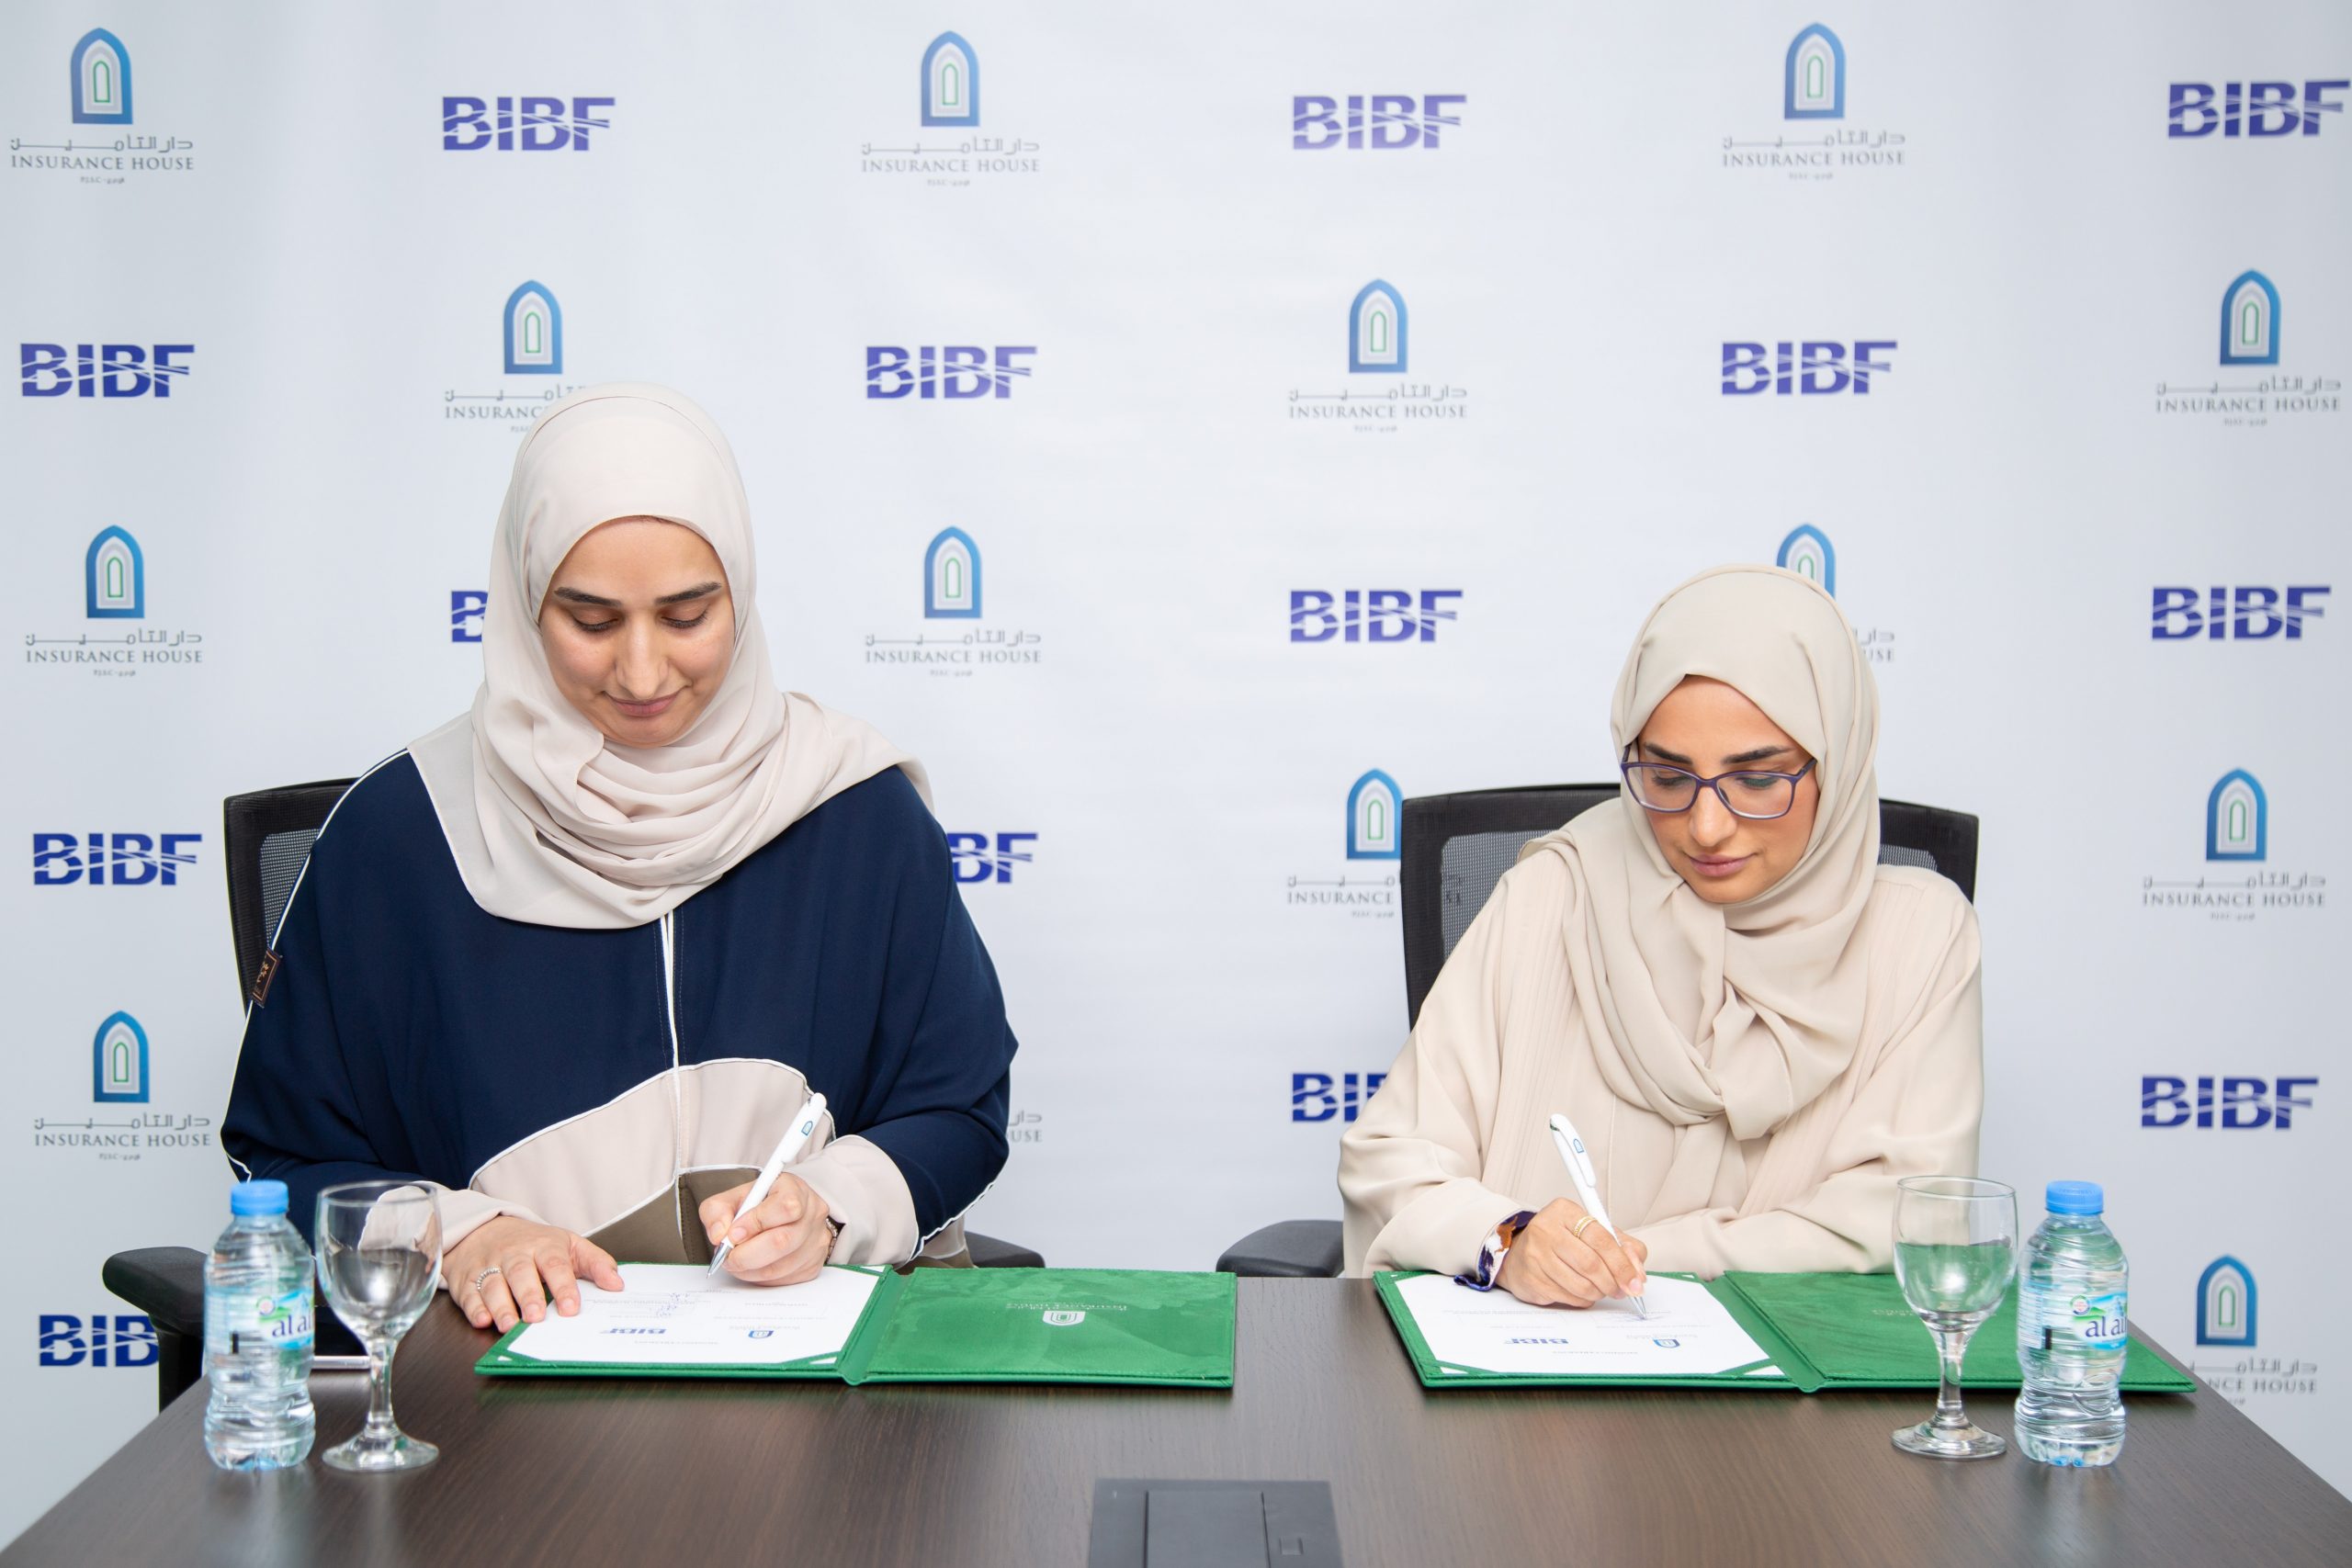 Insurance House Partners with BIBF to Deliver Bespoke Insurance Programme